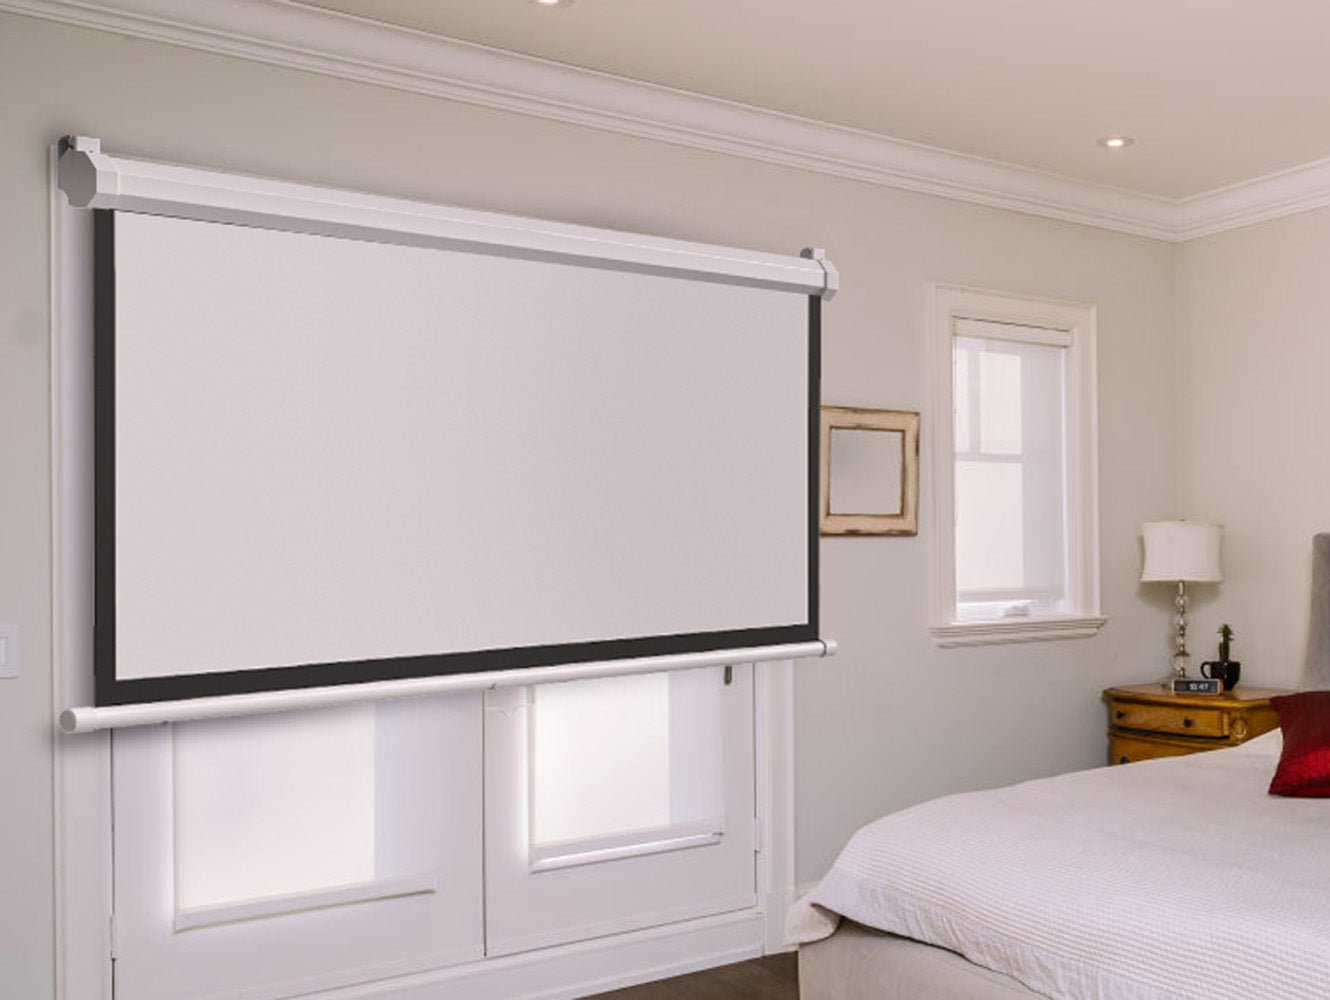 Crony Projection Wall Screen 100 Inch 4:3 Anti-Light With projector screen by manual Screen - Edragonmall.com